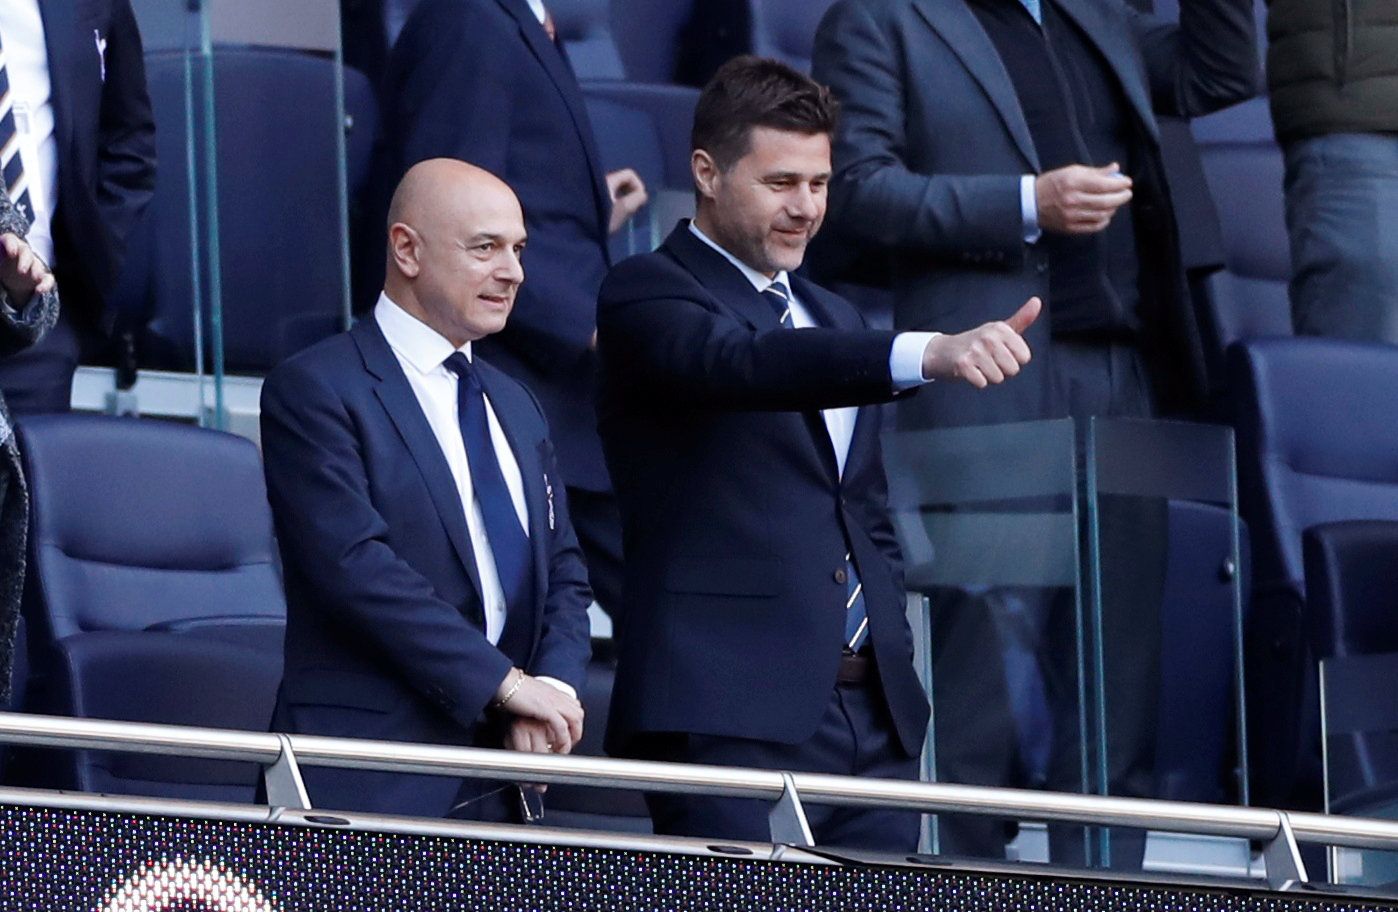 Soccer Football - Tottenham Hotspur Stadium Test Event - Under 18 Premier League - Tottenham Hotspur v Southampton - Tottenham Hotspur Stadium, London, Britain - March 24, 2019  Tottenham manager Mauricio Pochettino and chairman Daniel Levy in the stands   Action Images via Reuters/Paul Childs